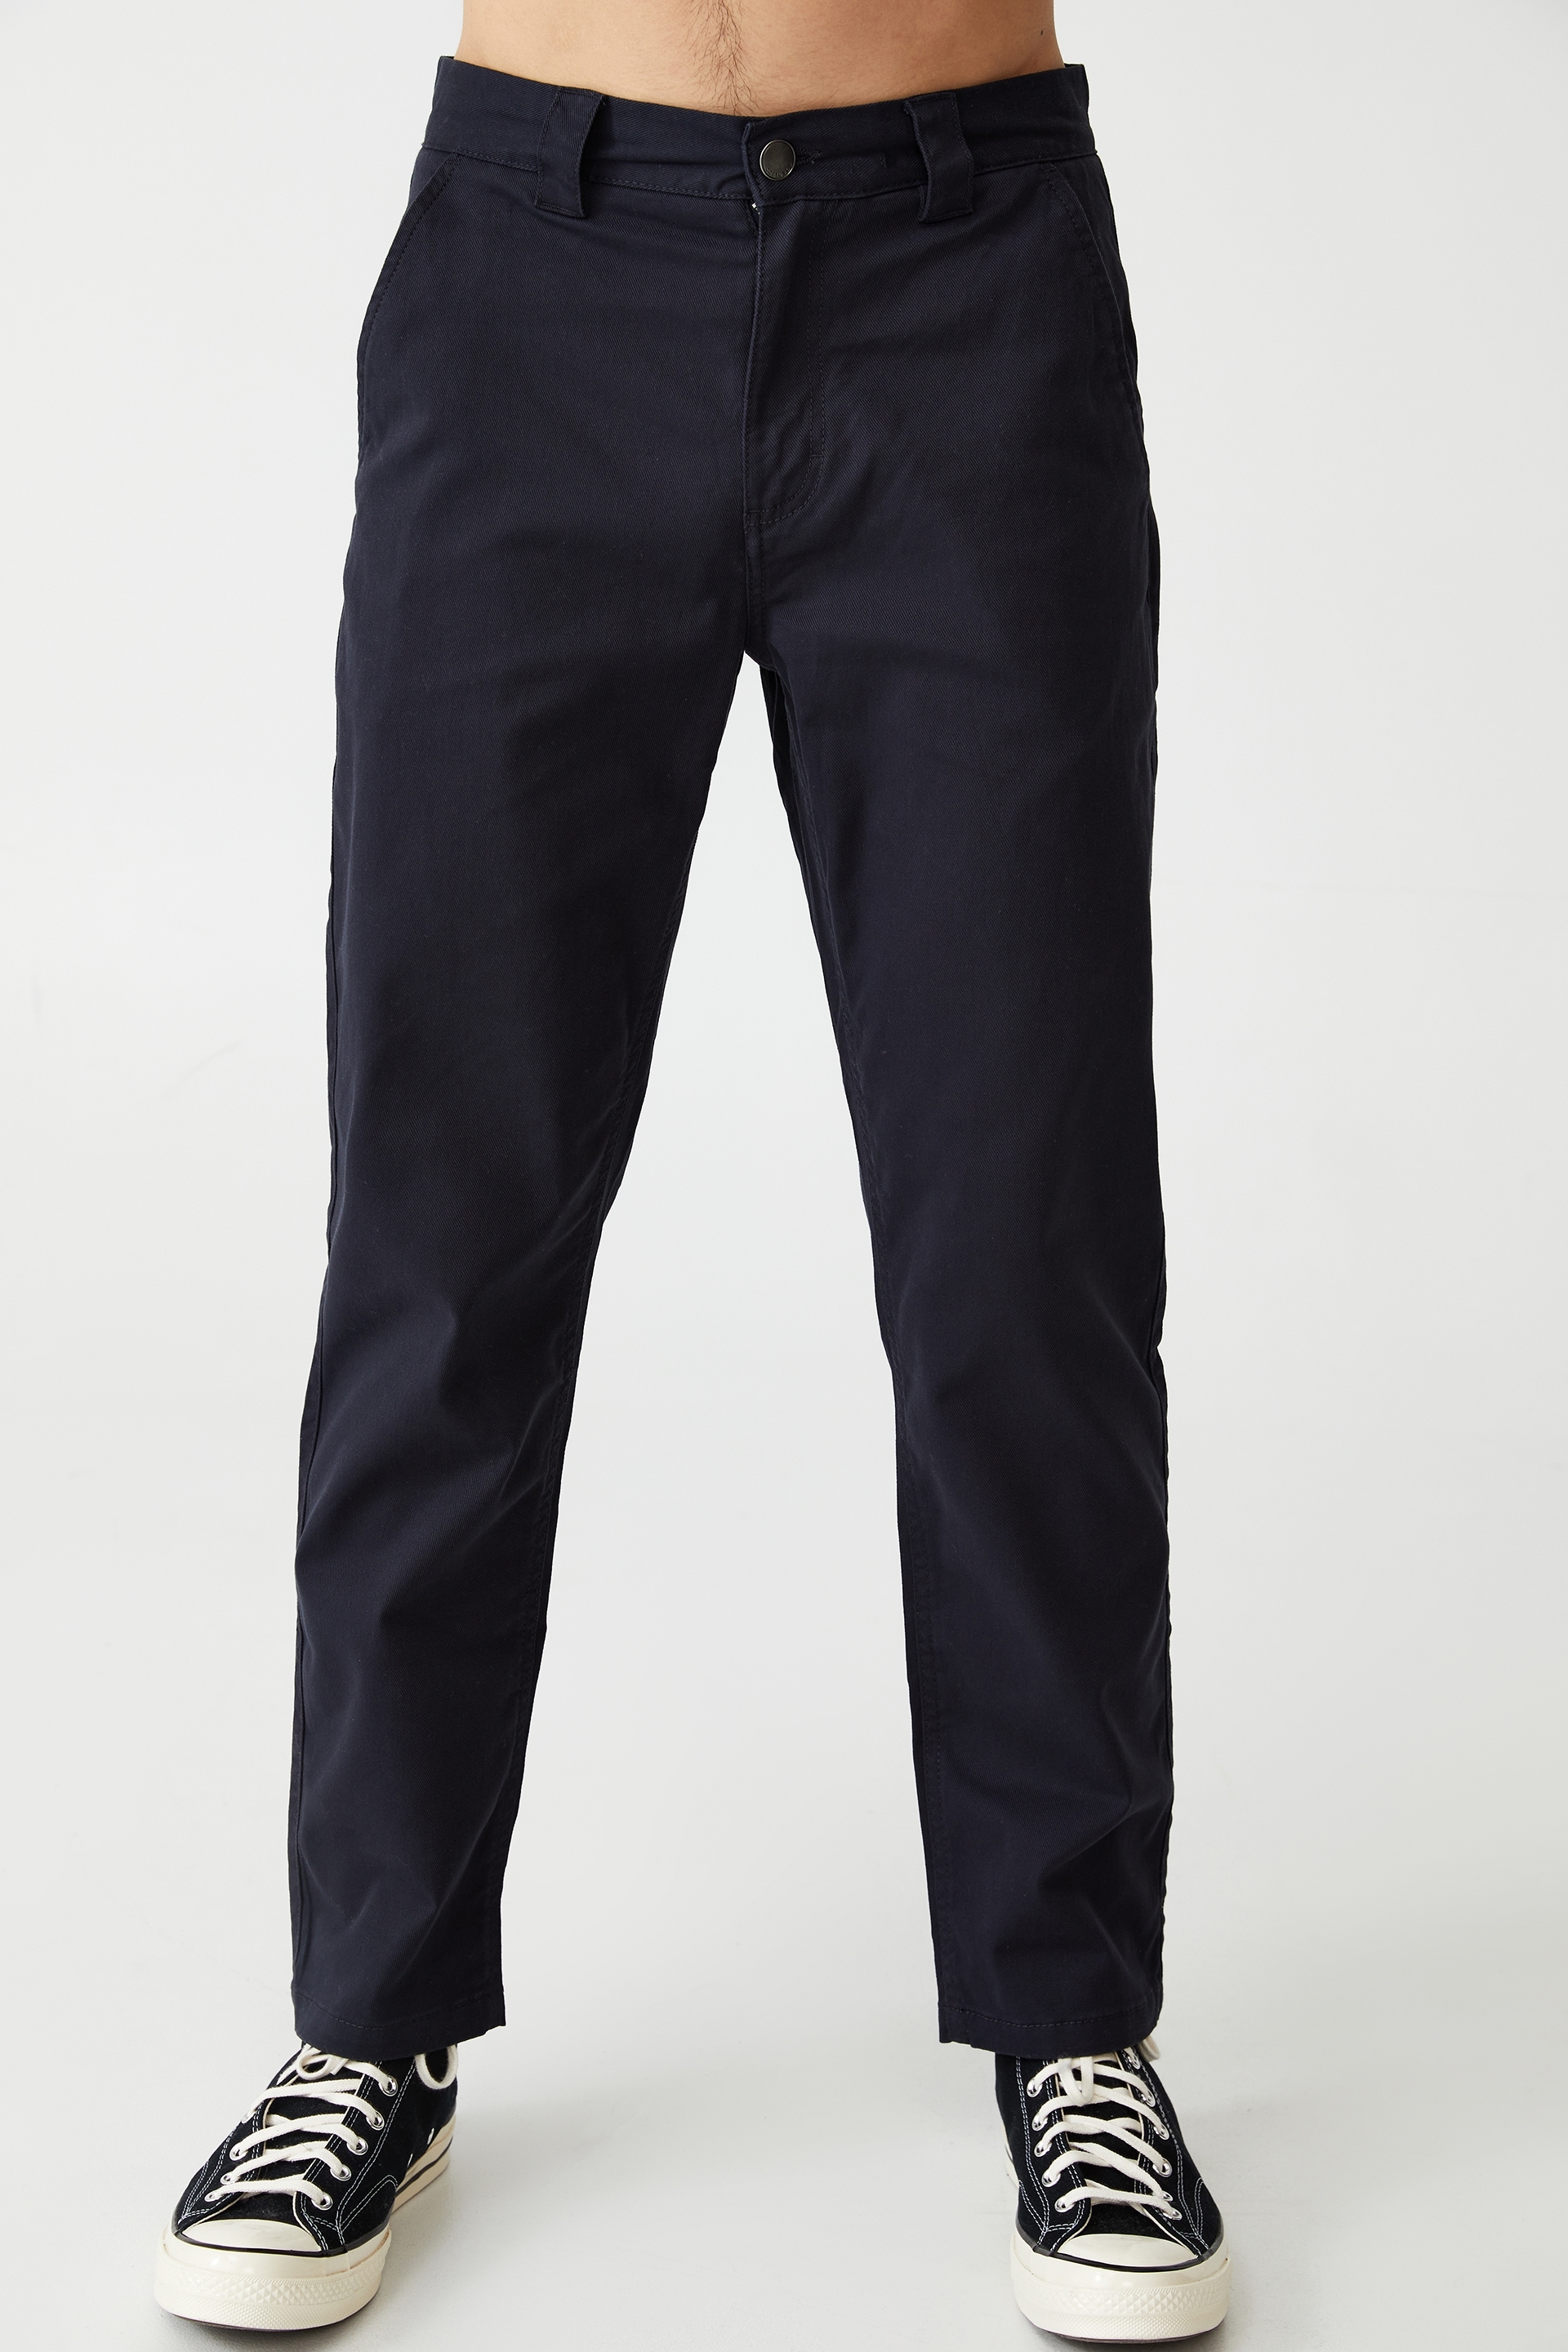 Cotton On Men - Beckley Pant - Navy